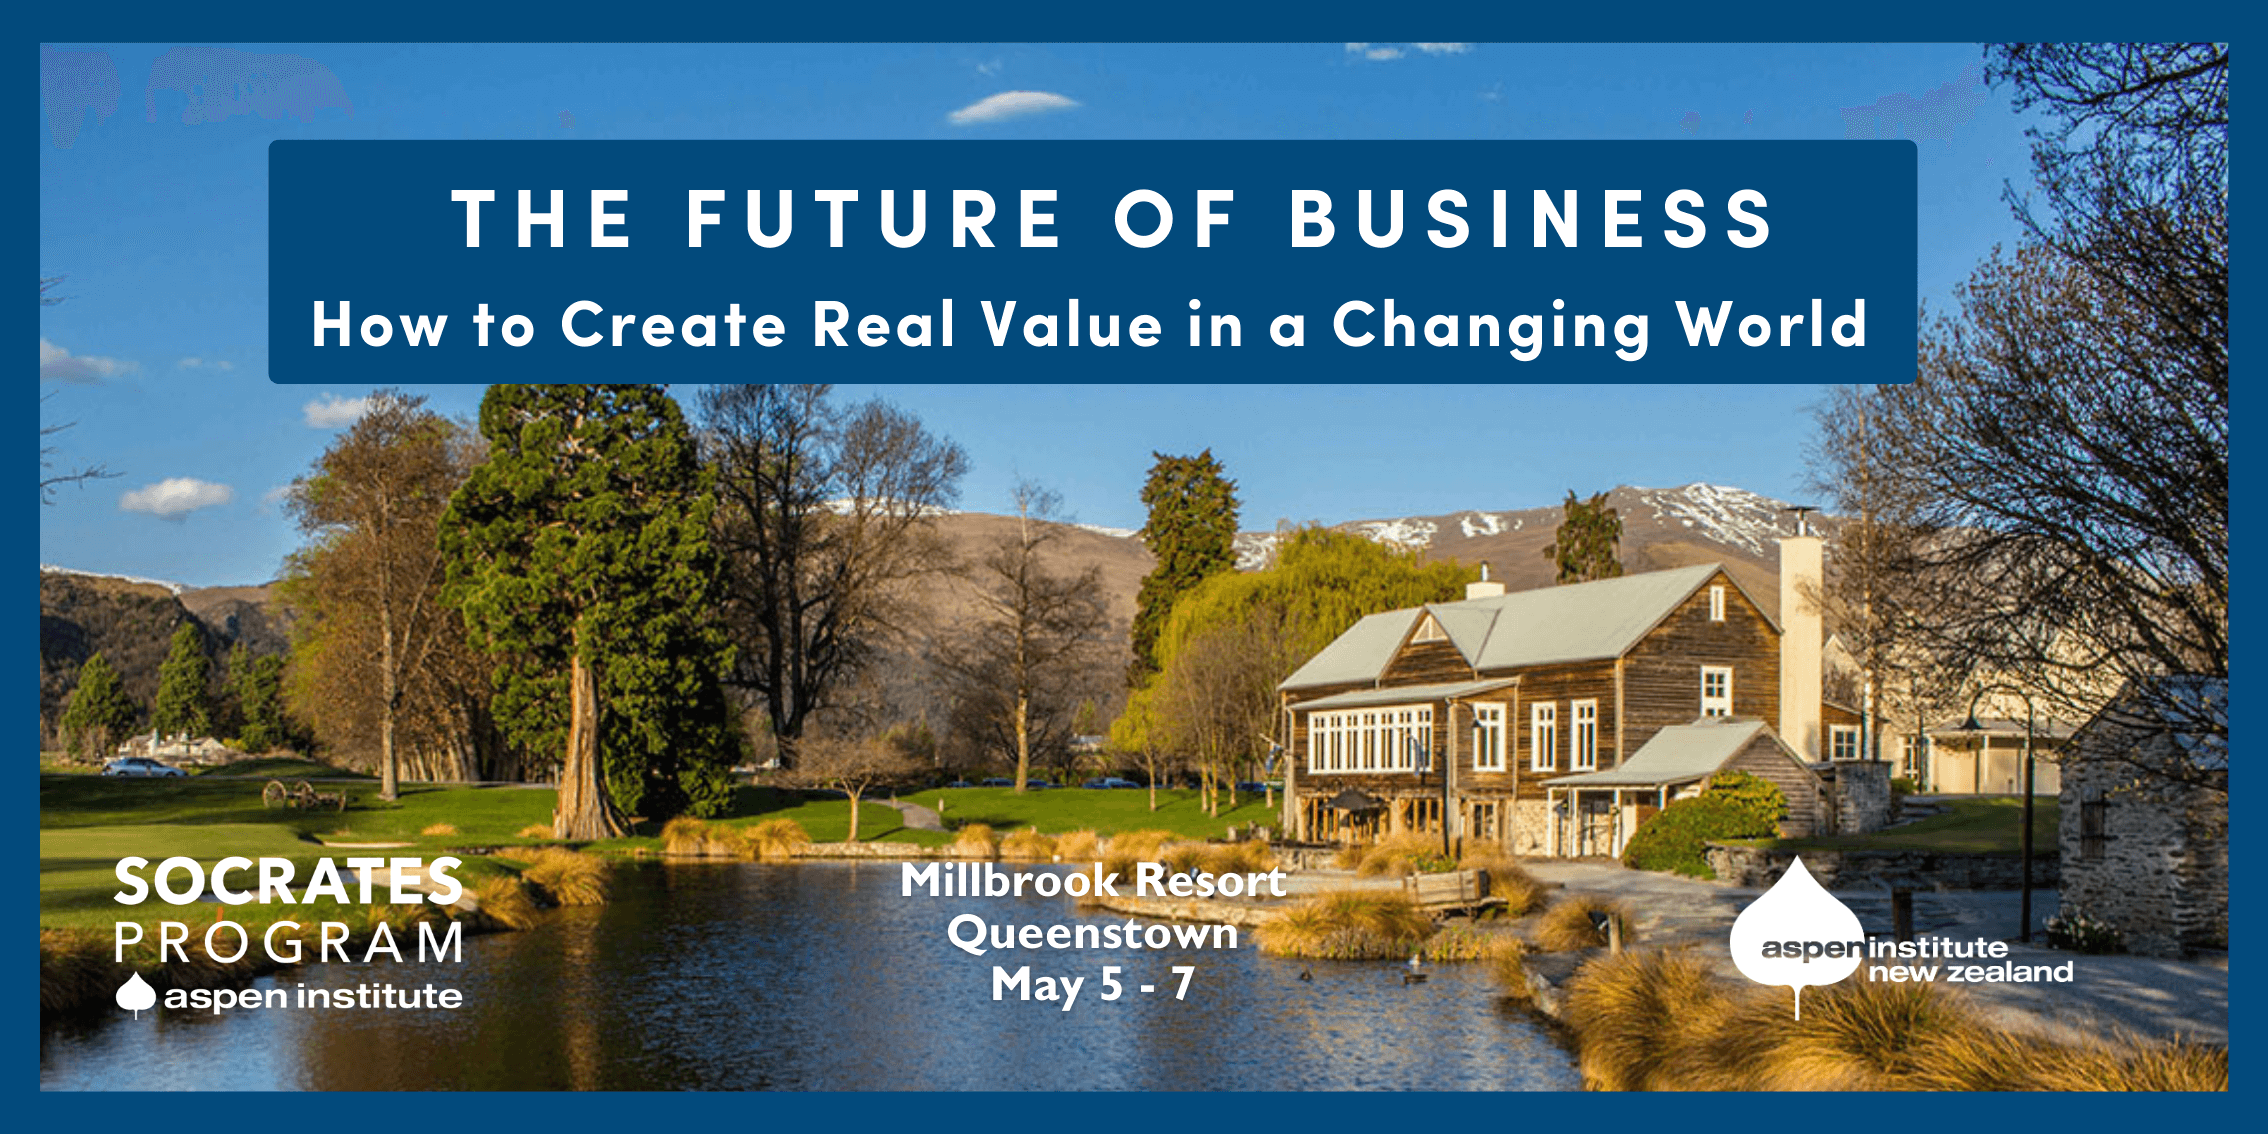 The Future of Business: How to Create Real Value in a Changing World